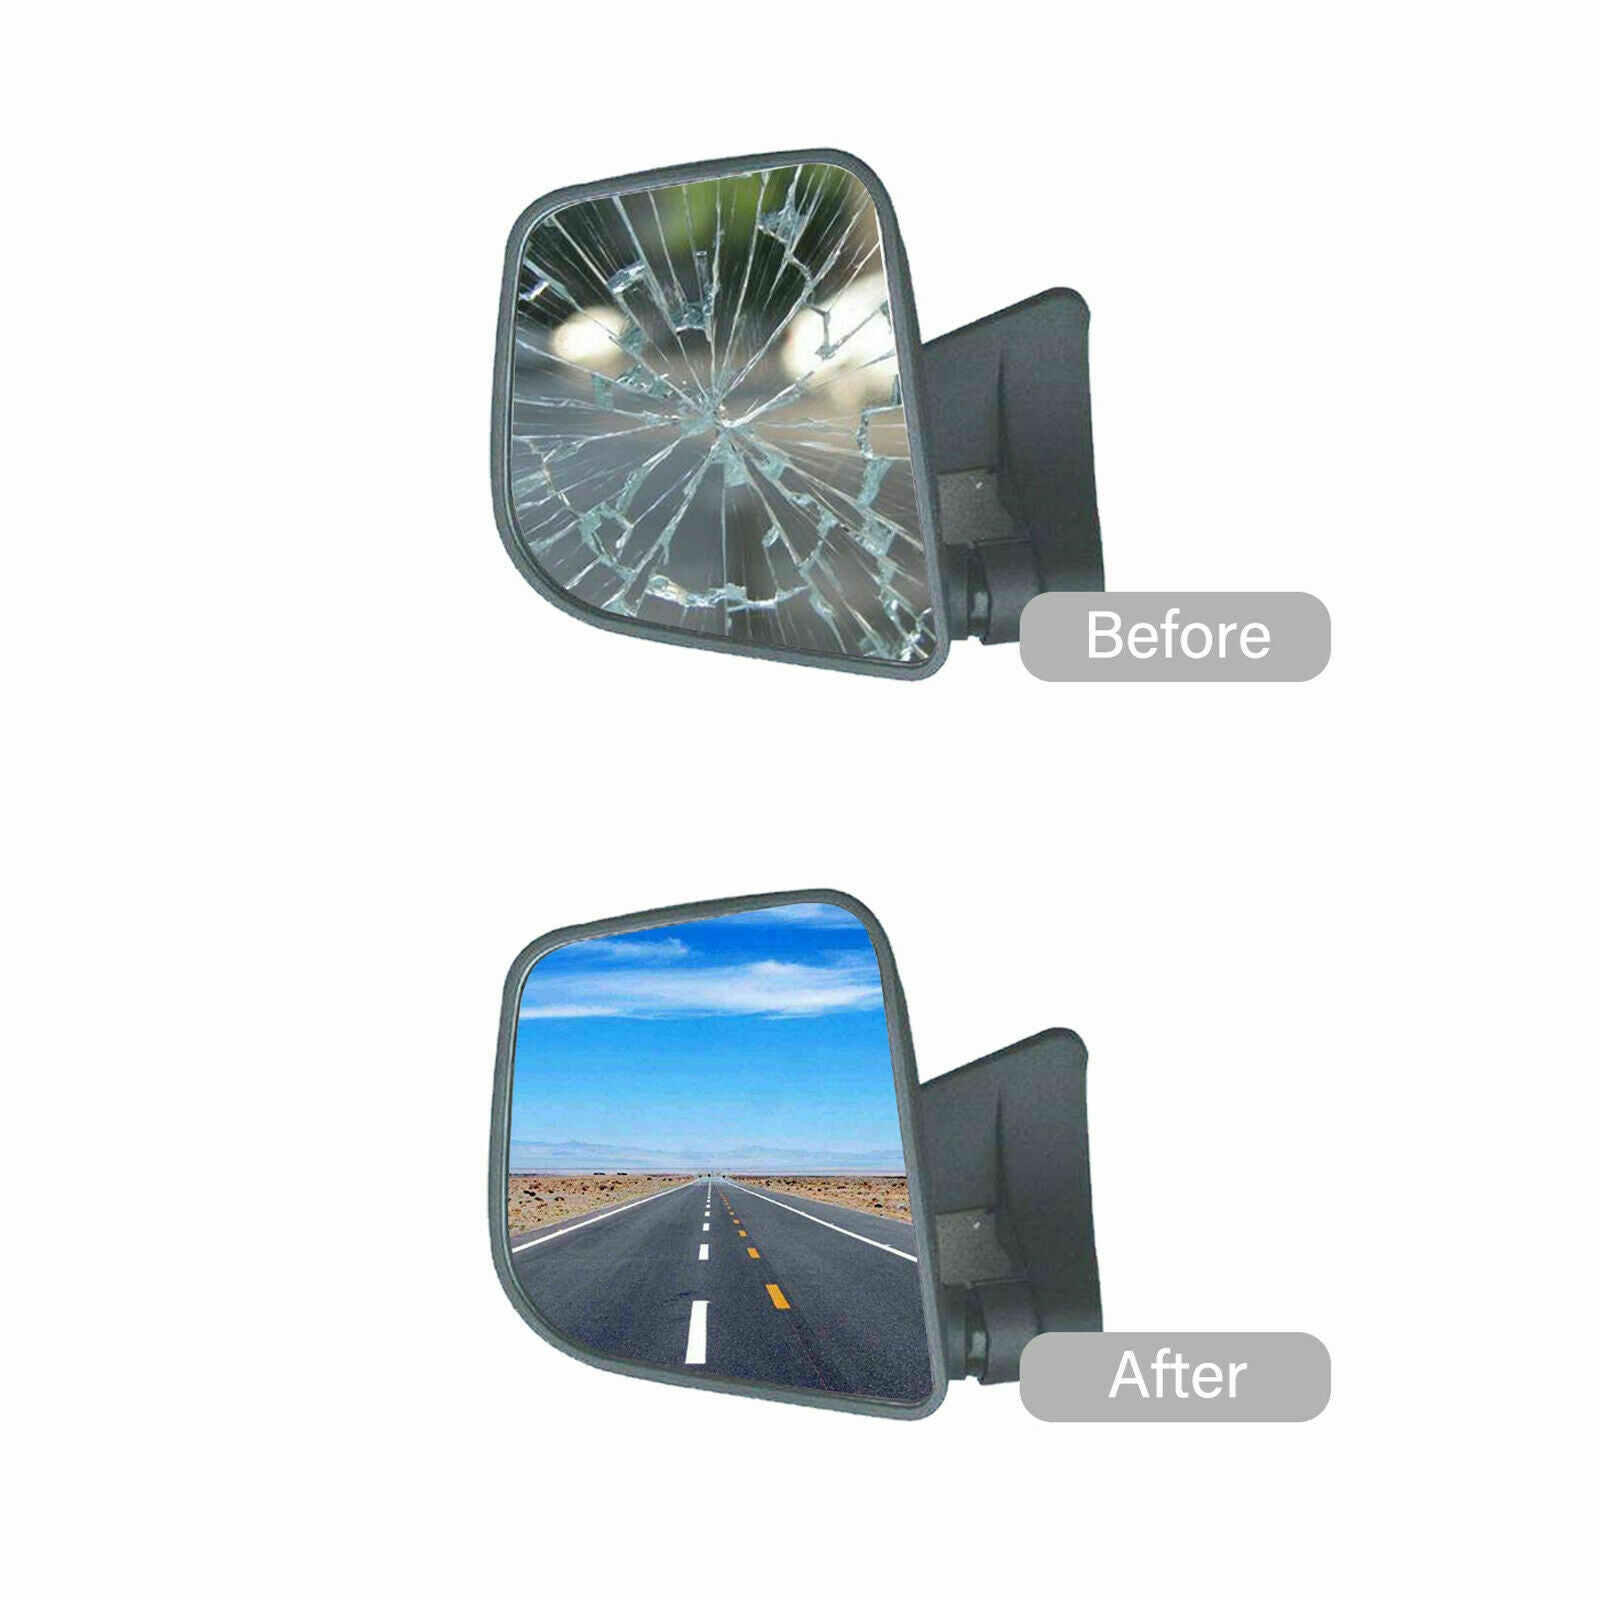 WLLW Towing Lower Mirror Glass Replacement for 03-19 Chevrolet Express 1500 2500 3500/92-02 Ford Econoline/02-07 GMC Savana , Driver Left LH/Passenger Right RH/The Both Sides Convex M-0032